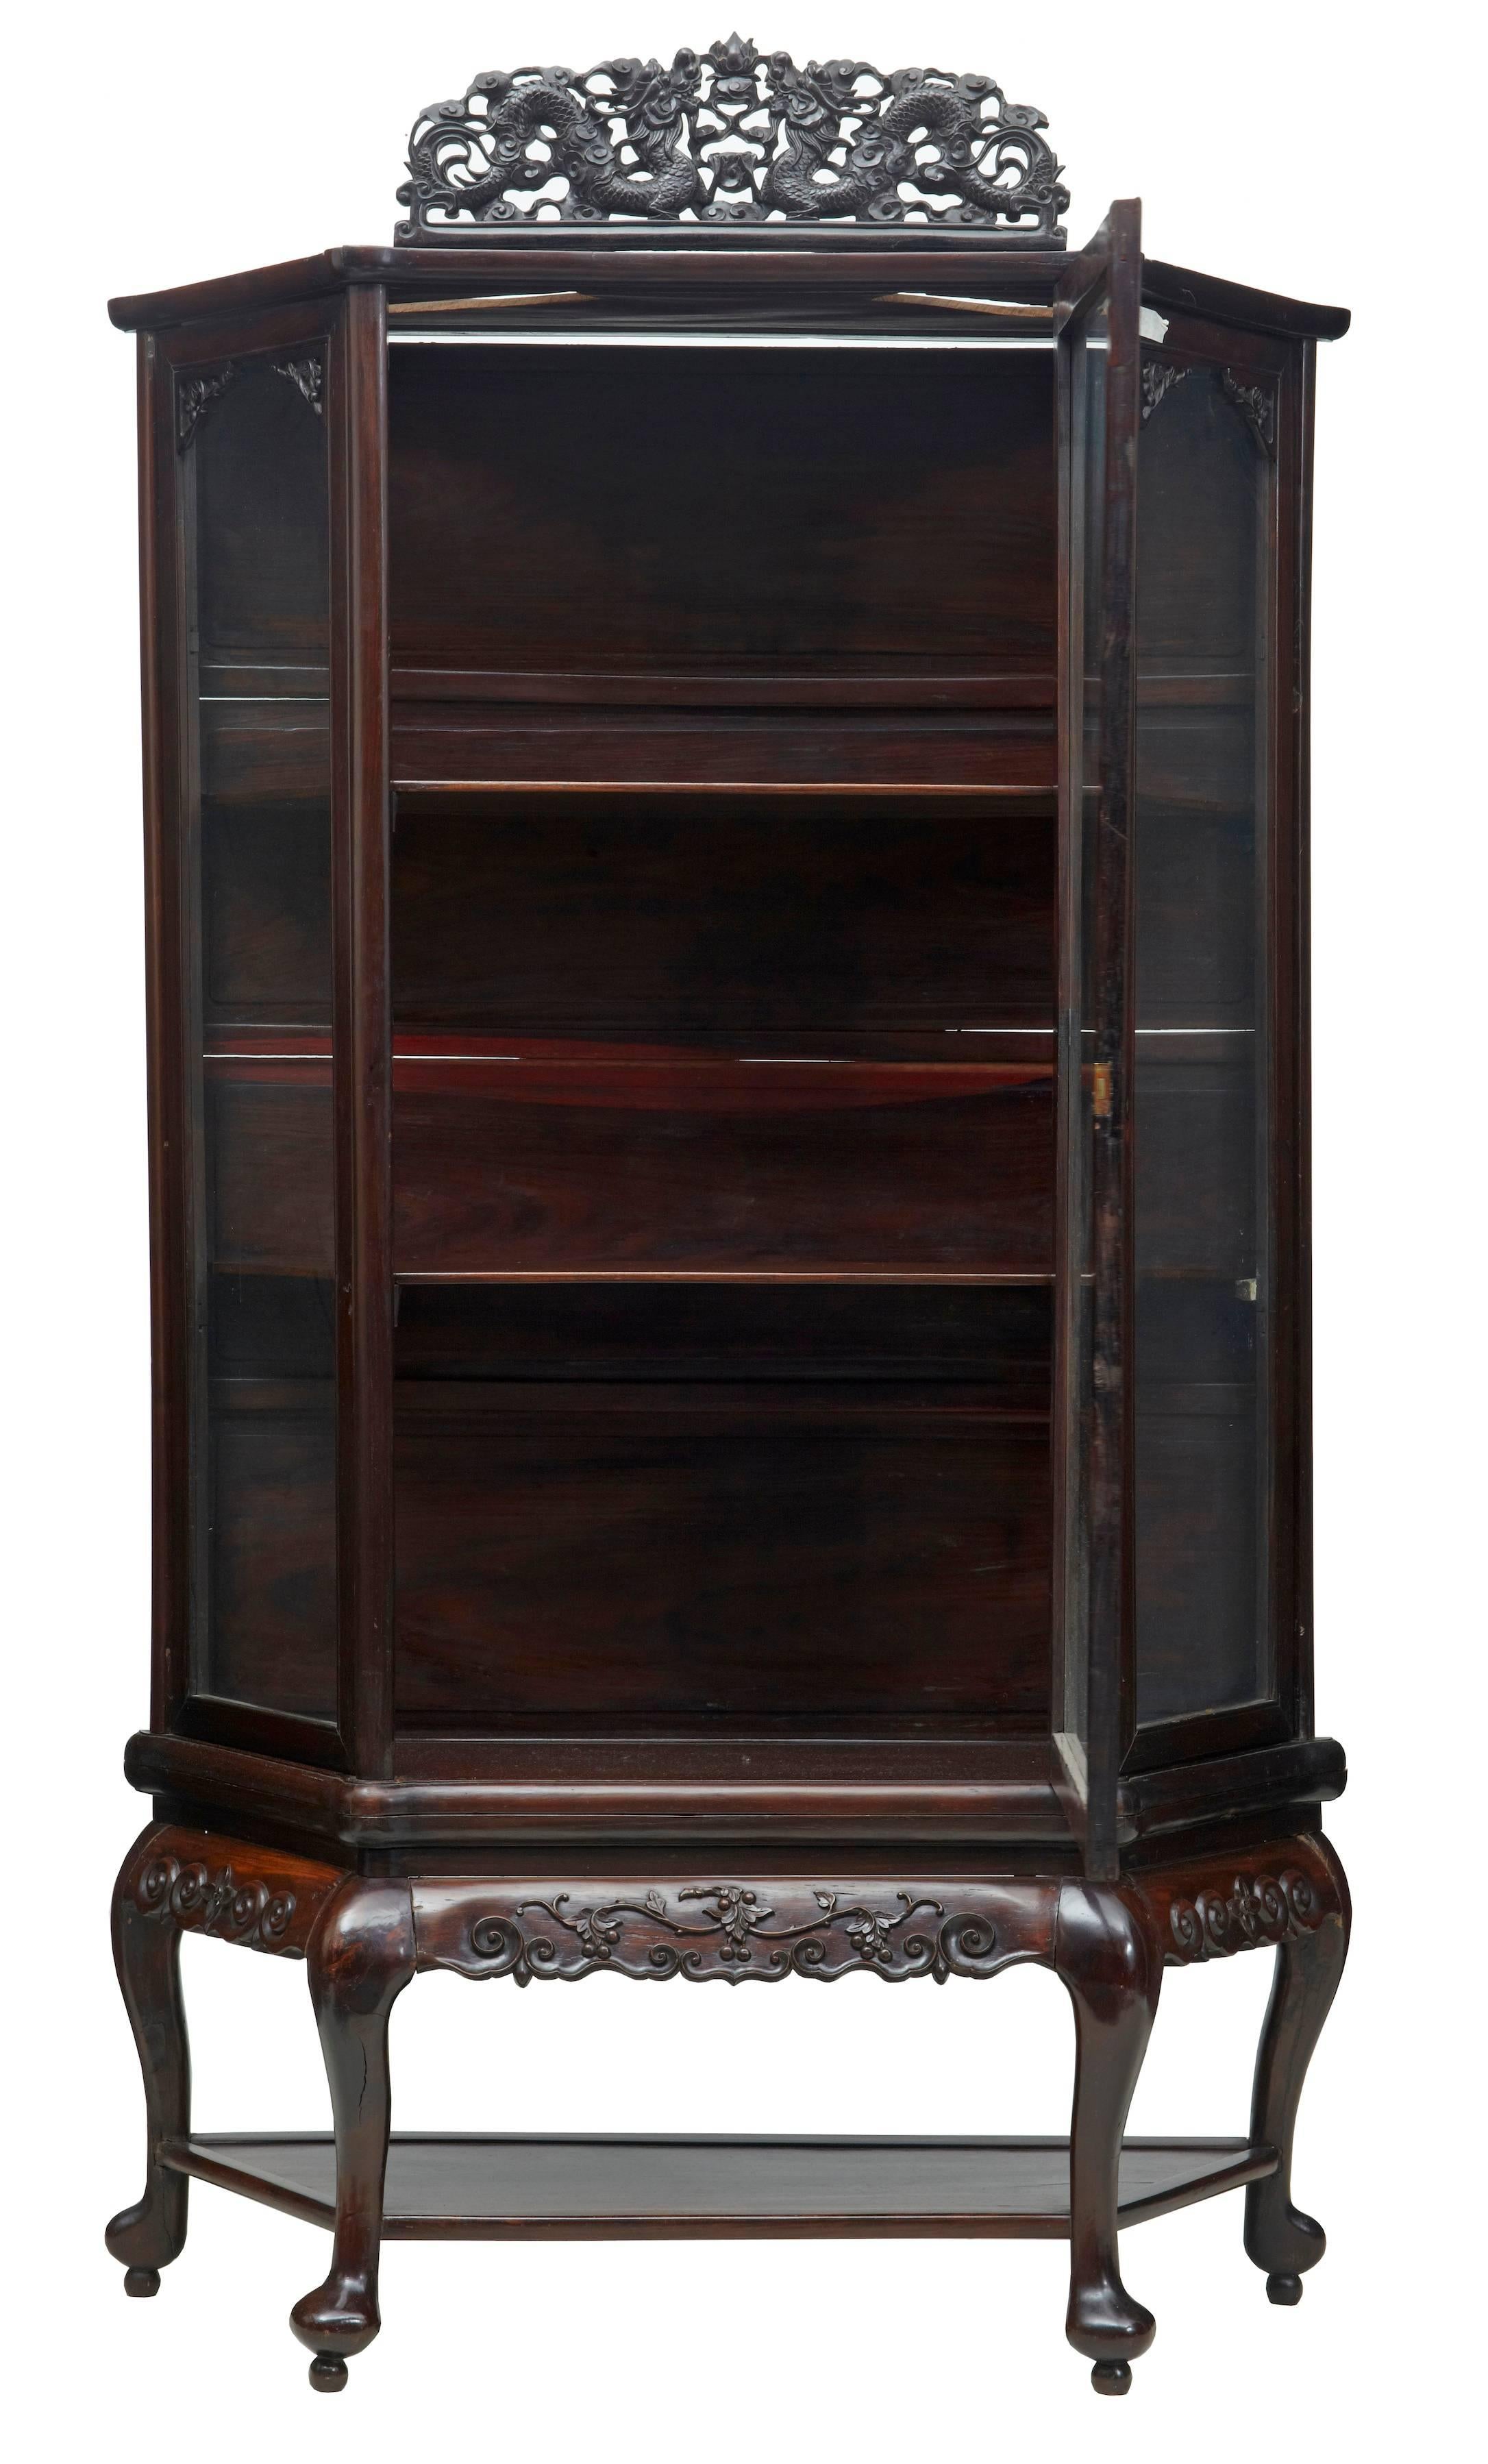 Late 19th century Chinese display cabinet, circa 1890.
Single large glazed door opens to two shelves, stands on four shaped legs united by a shelf.
Detachable pierced carving of dragons to the top, this would have been flanked either side by